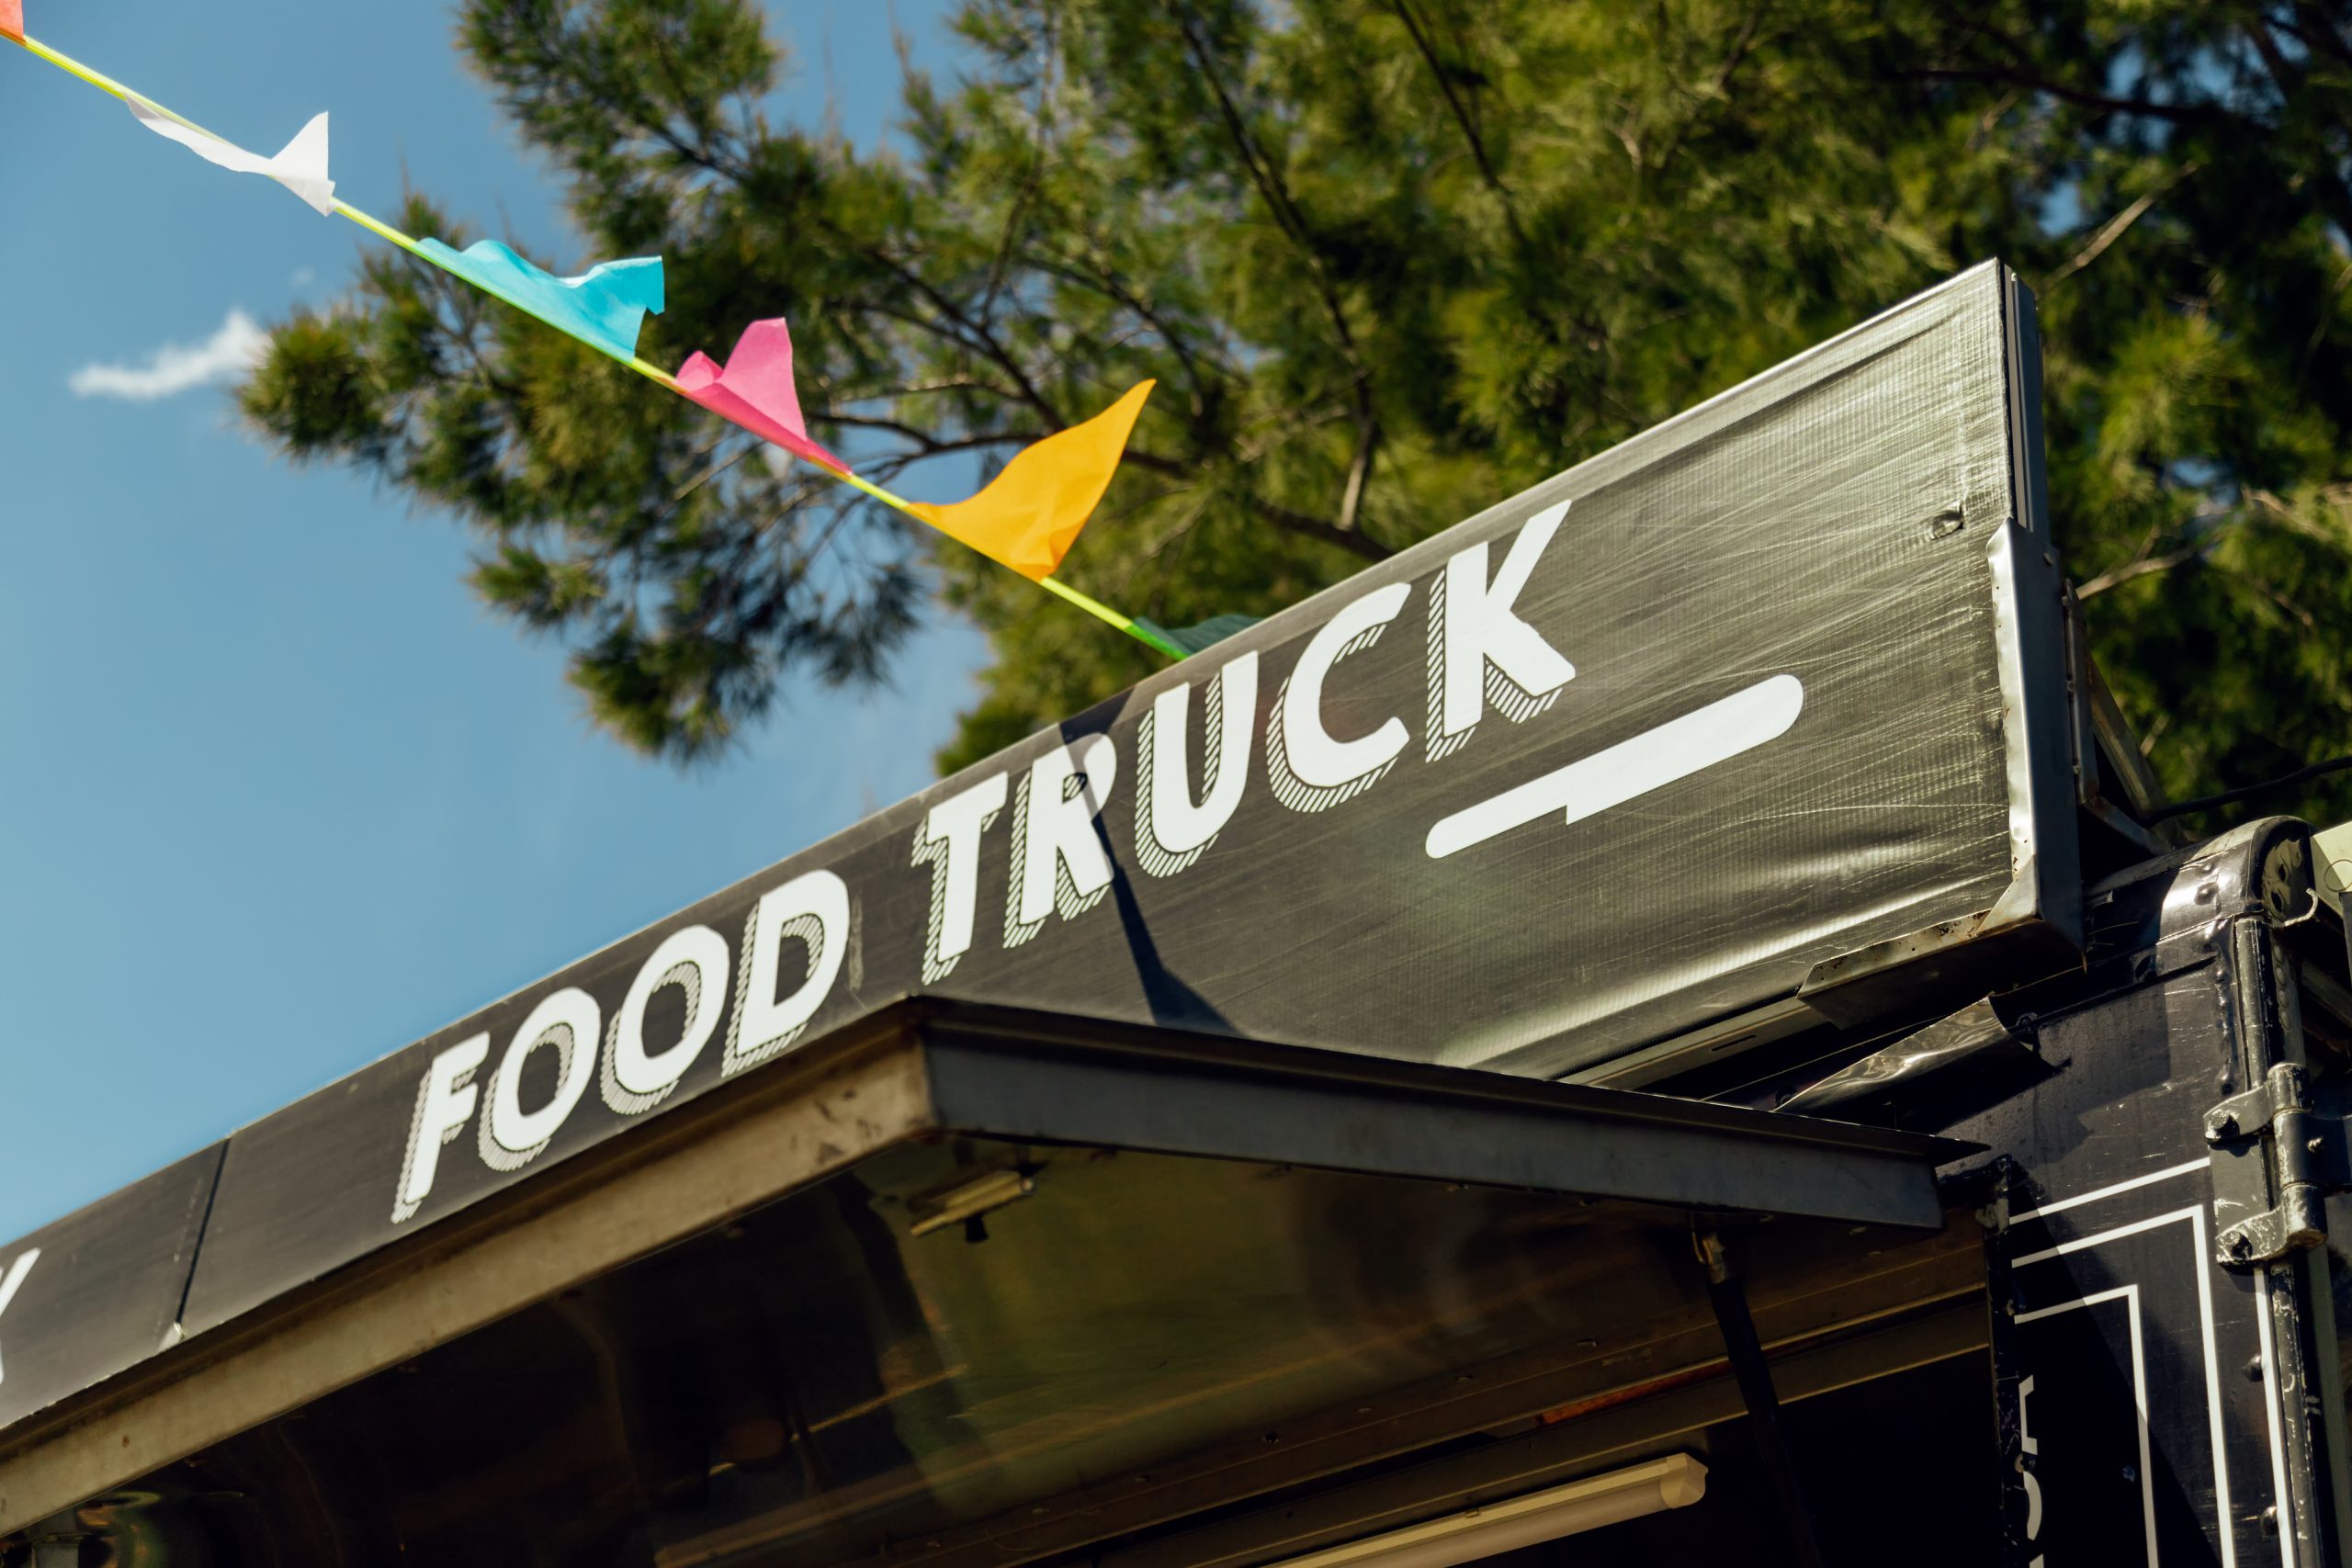 Signboard of a food truck with colorful pennants